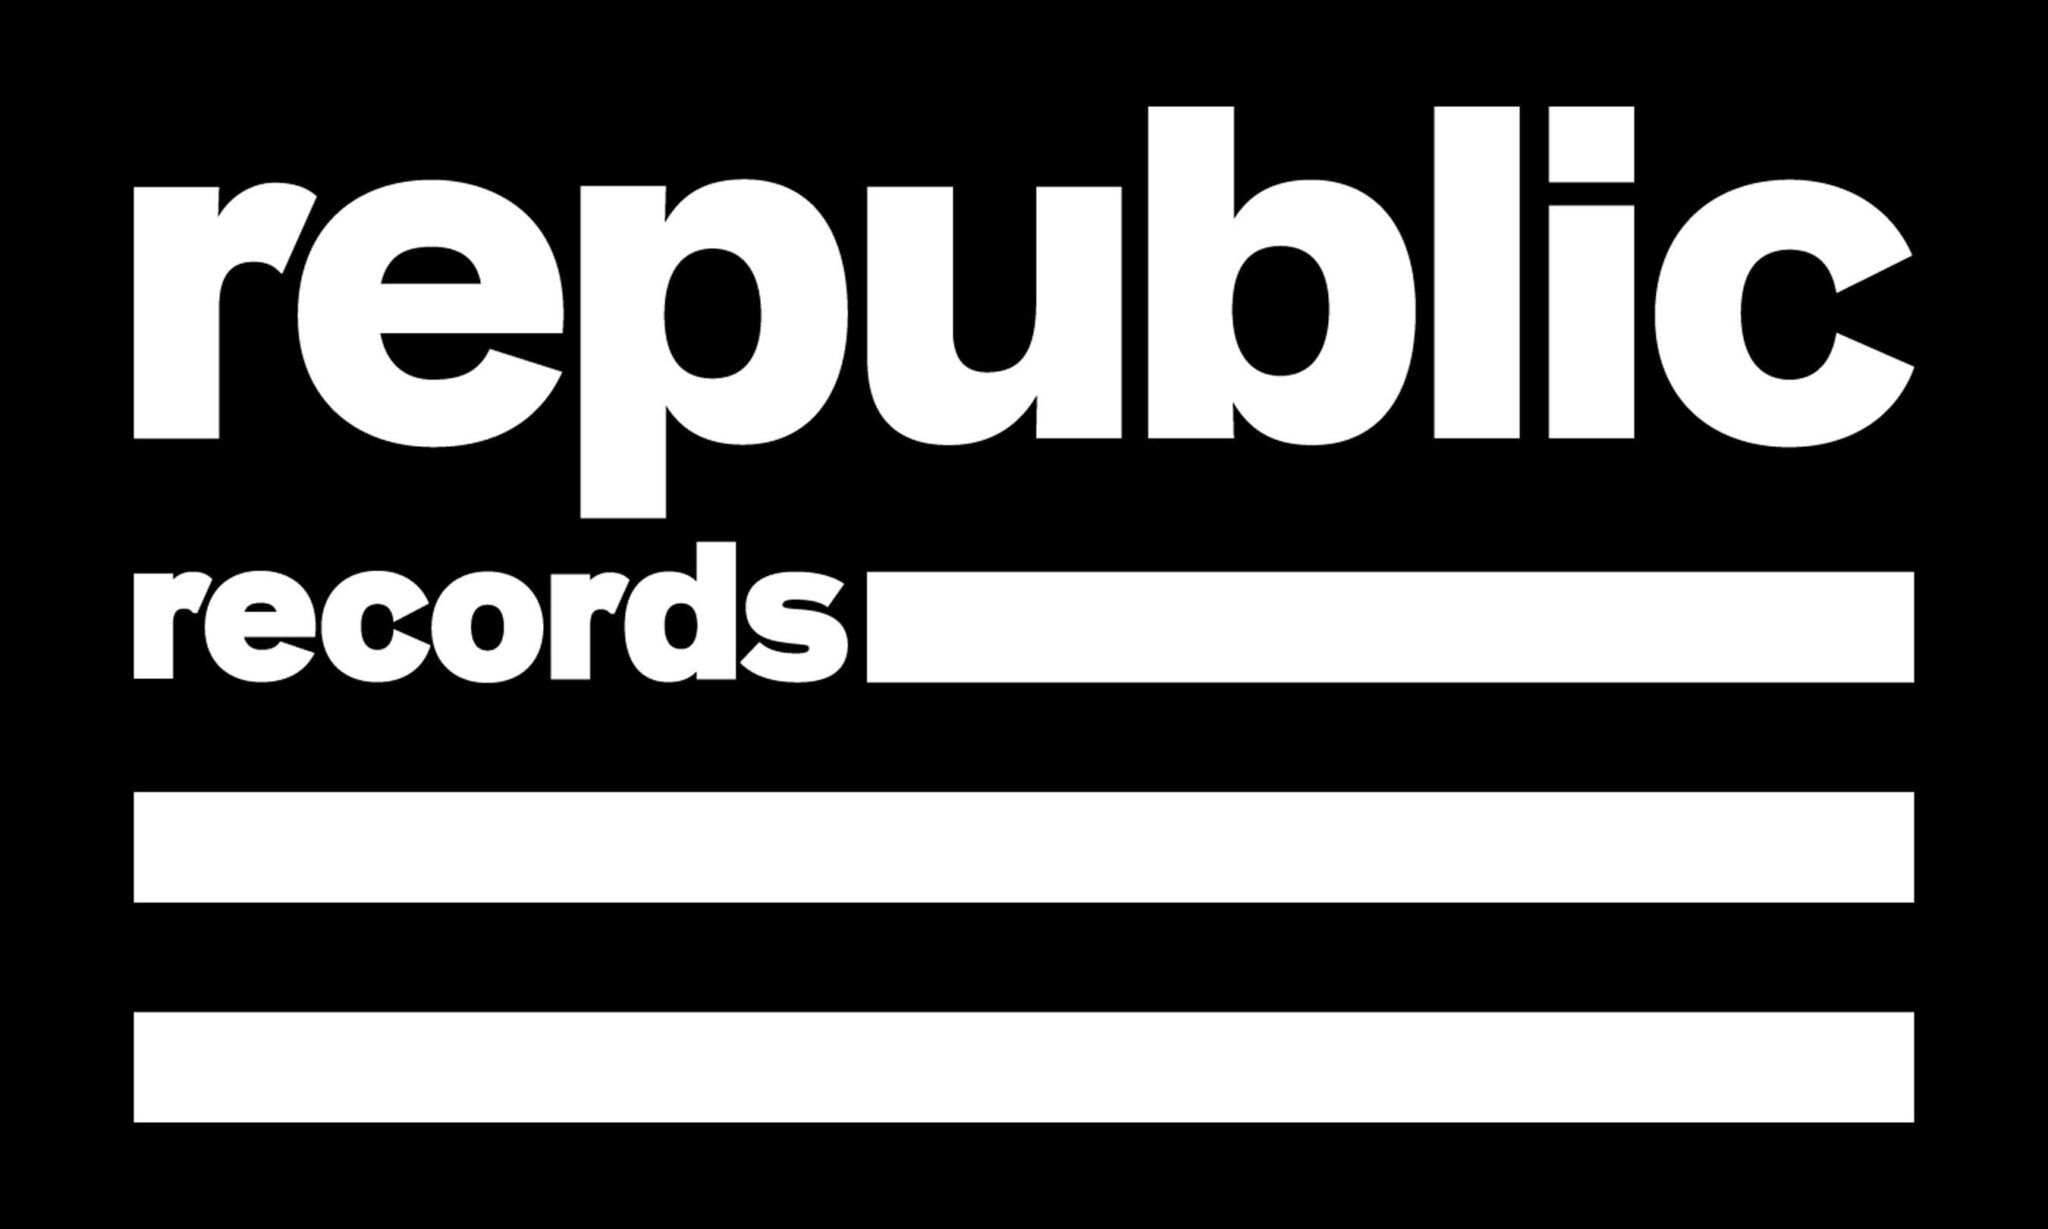 republic records founded